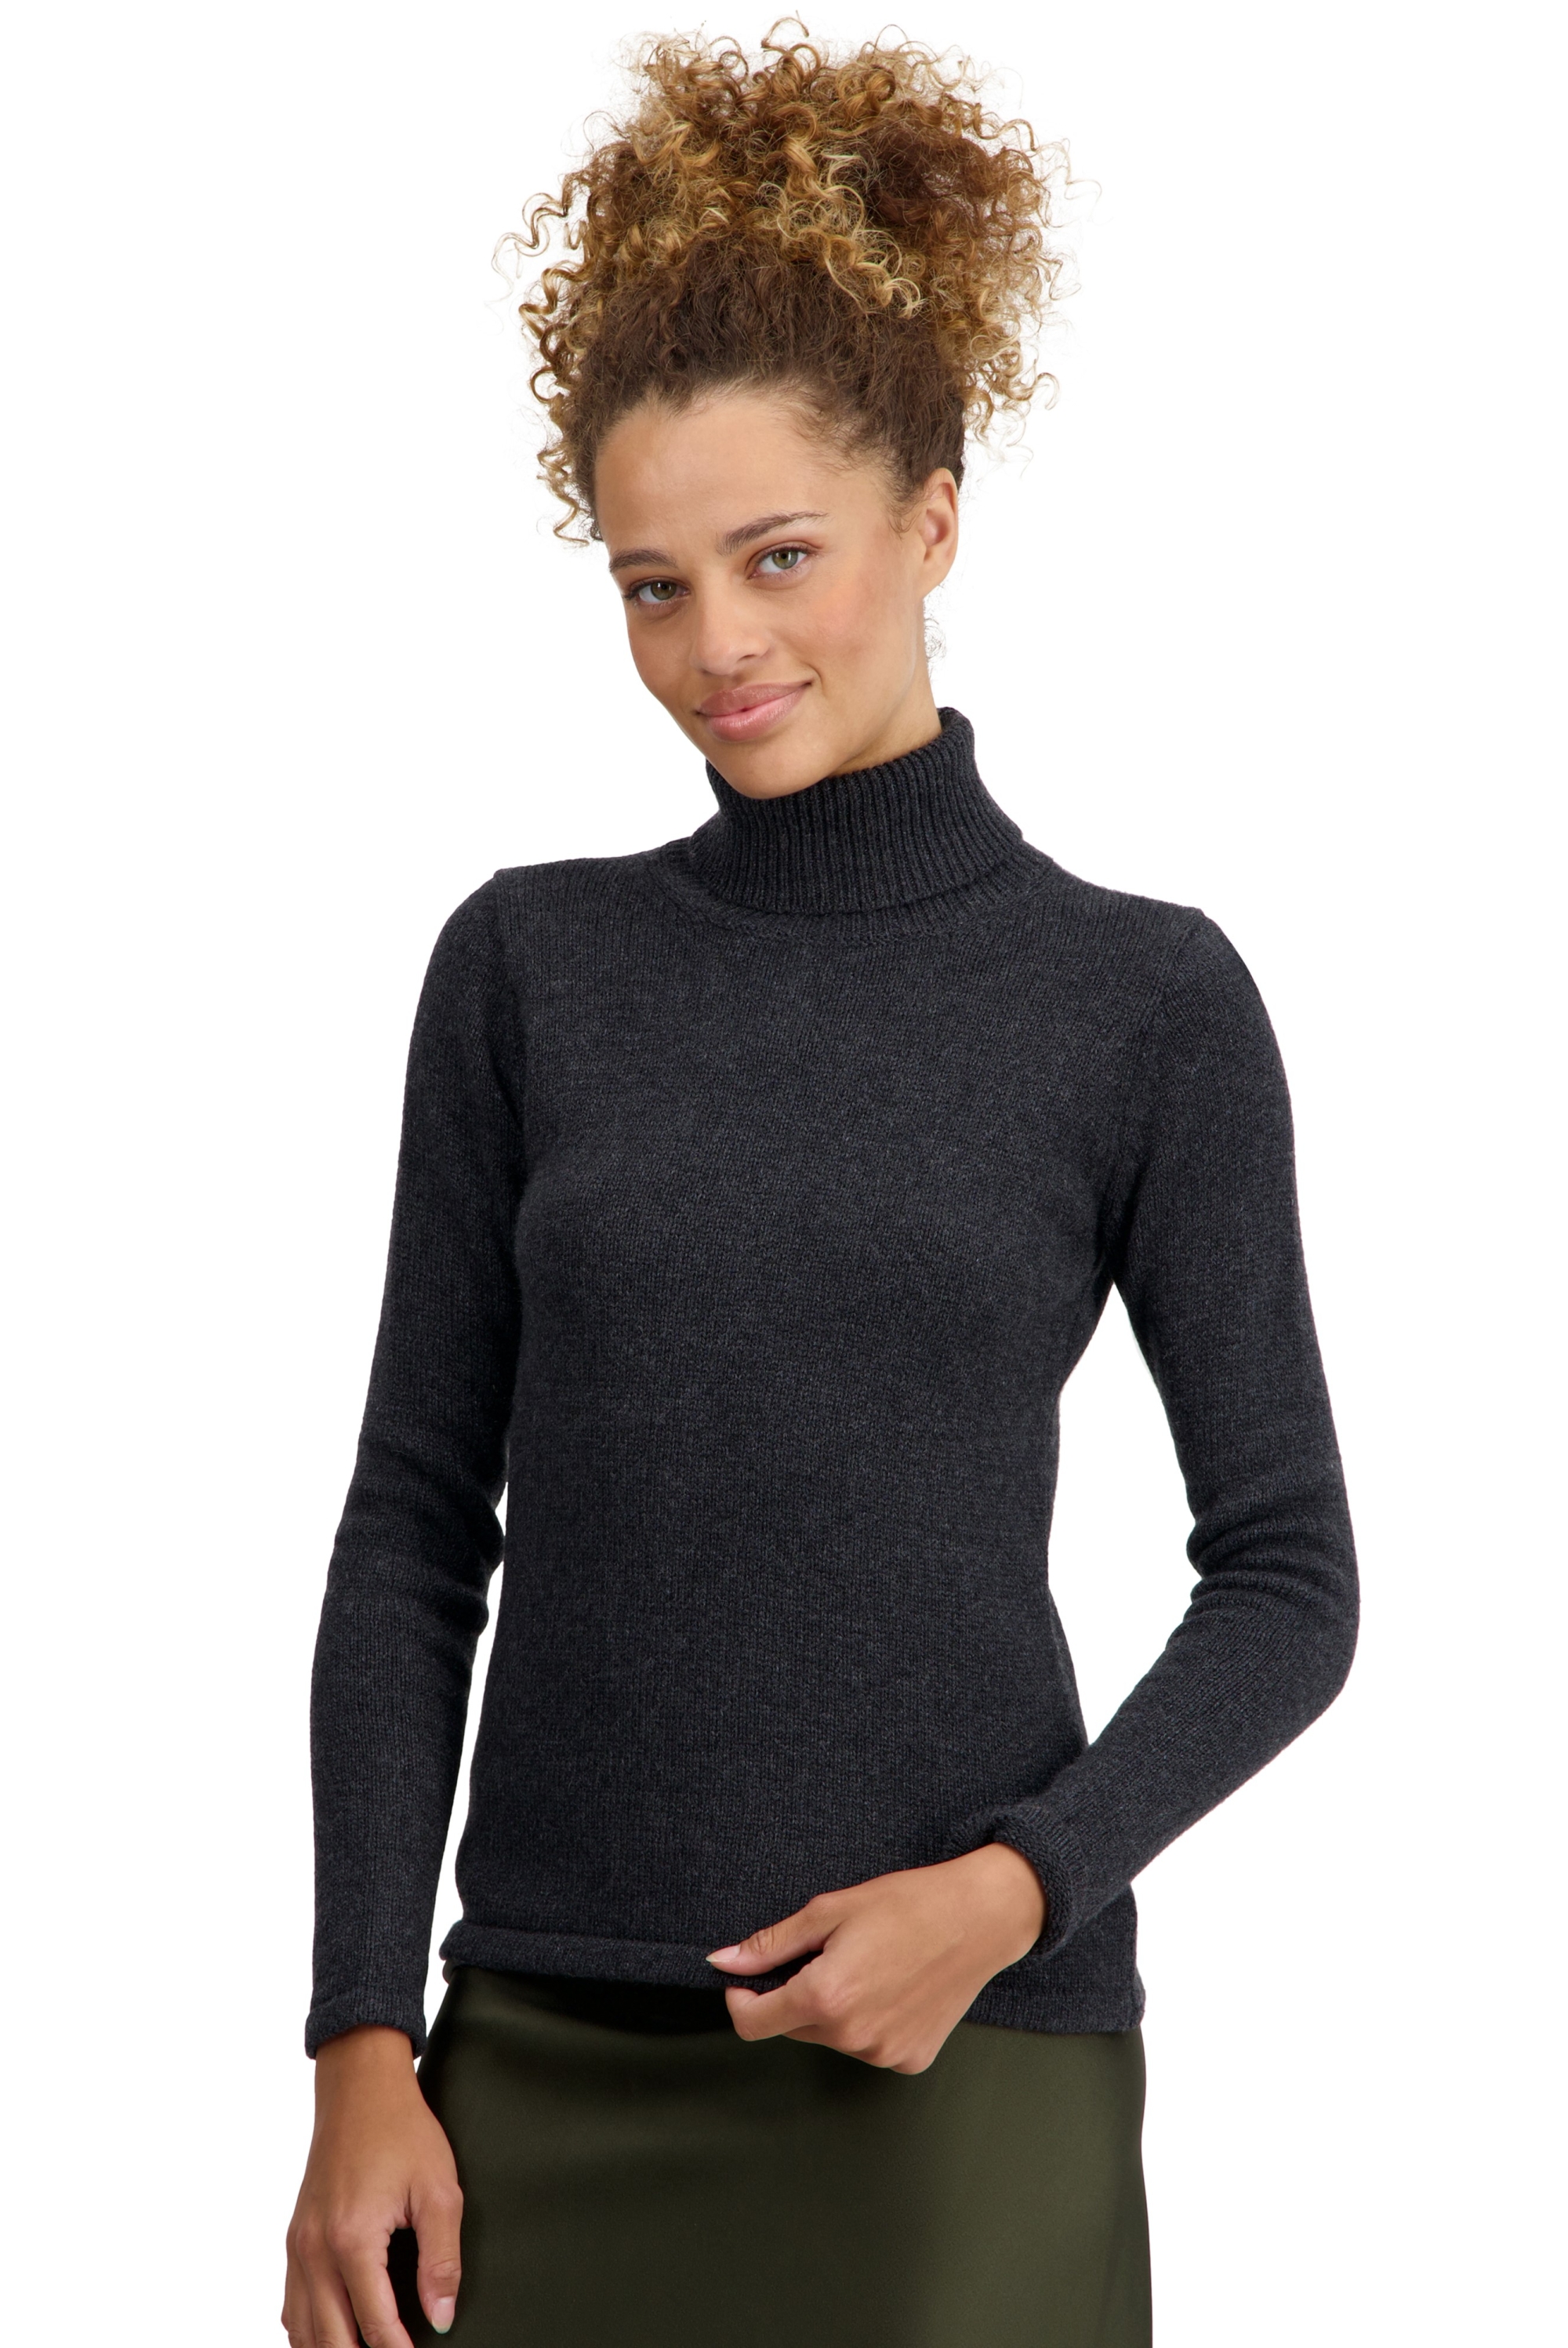 Cashmere ladies basic sweaters at low prices taipei first matt charcoal l